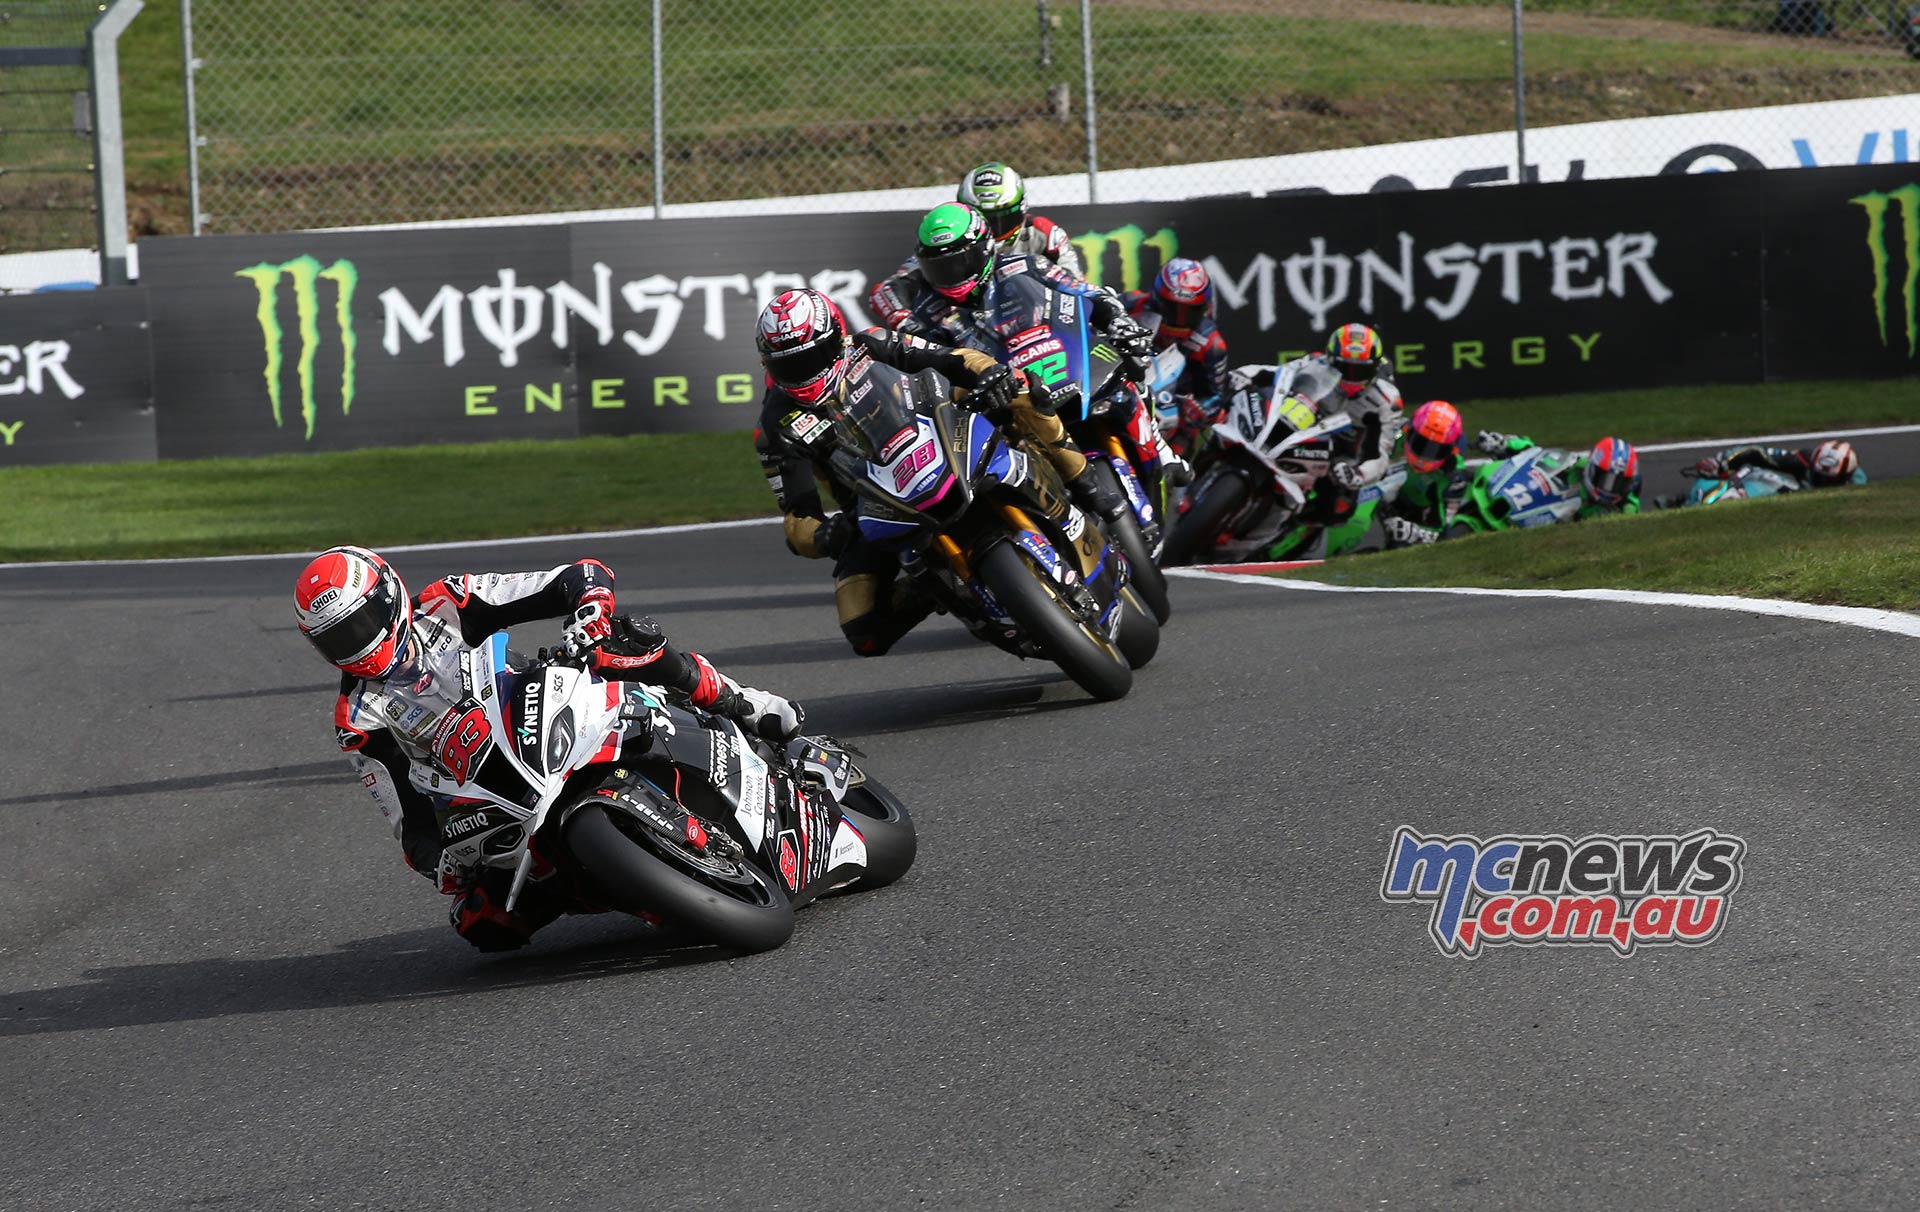 Massive Round Up From Cadwell Park Bsb Weekend Mcnews